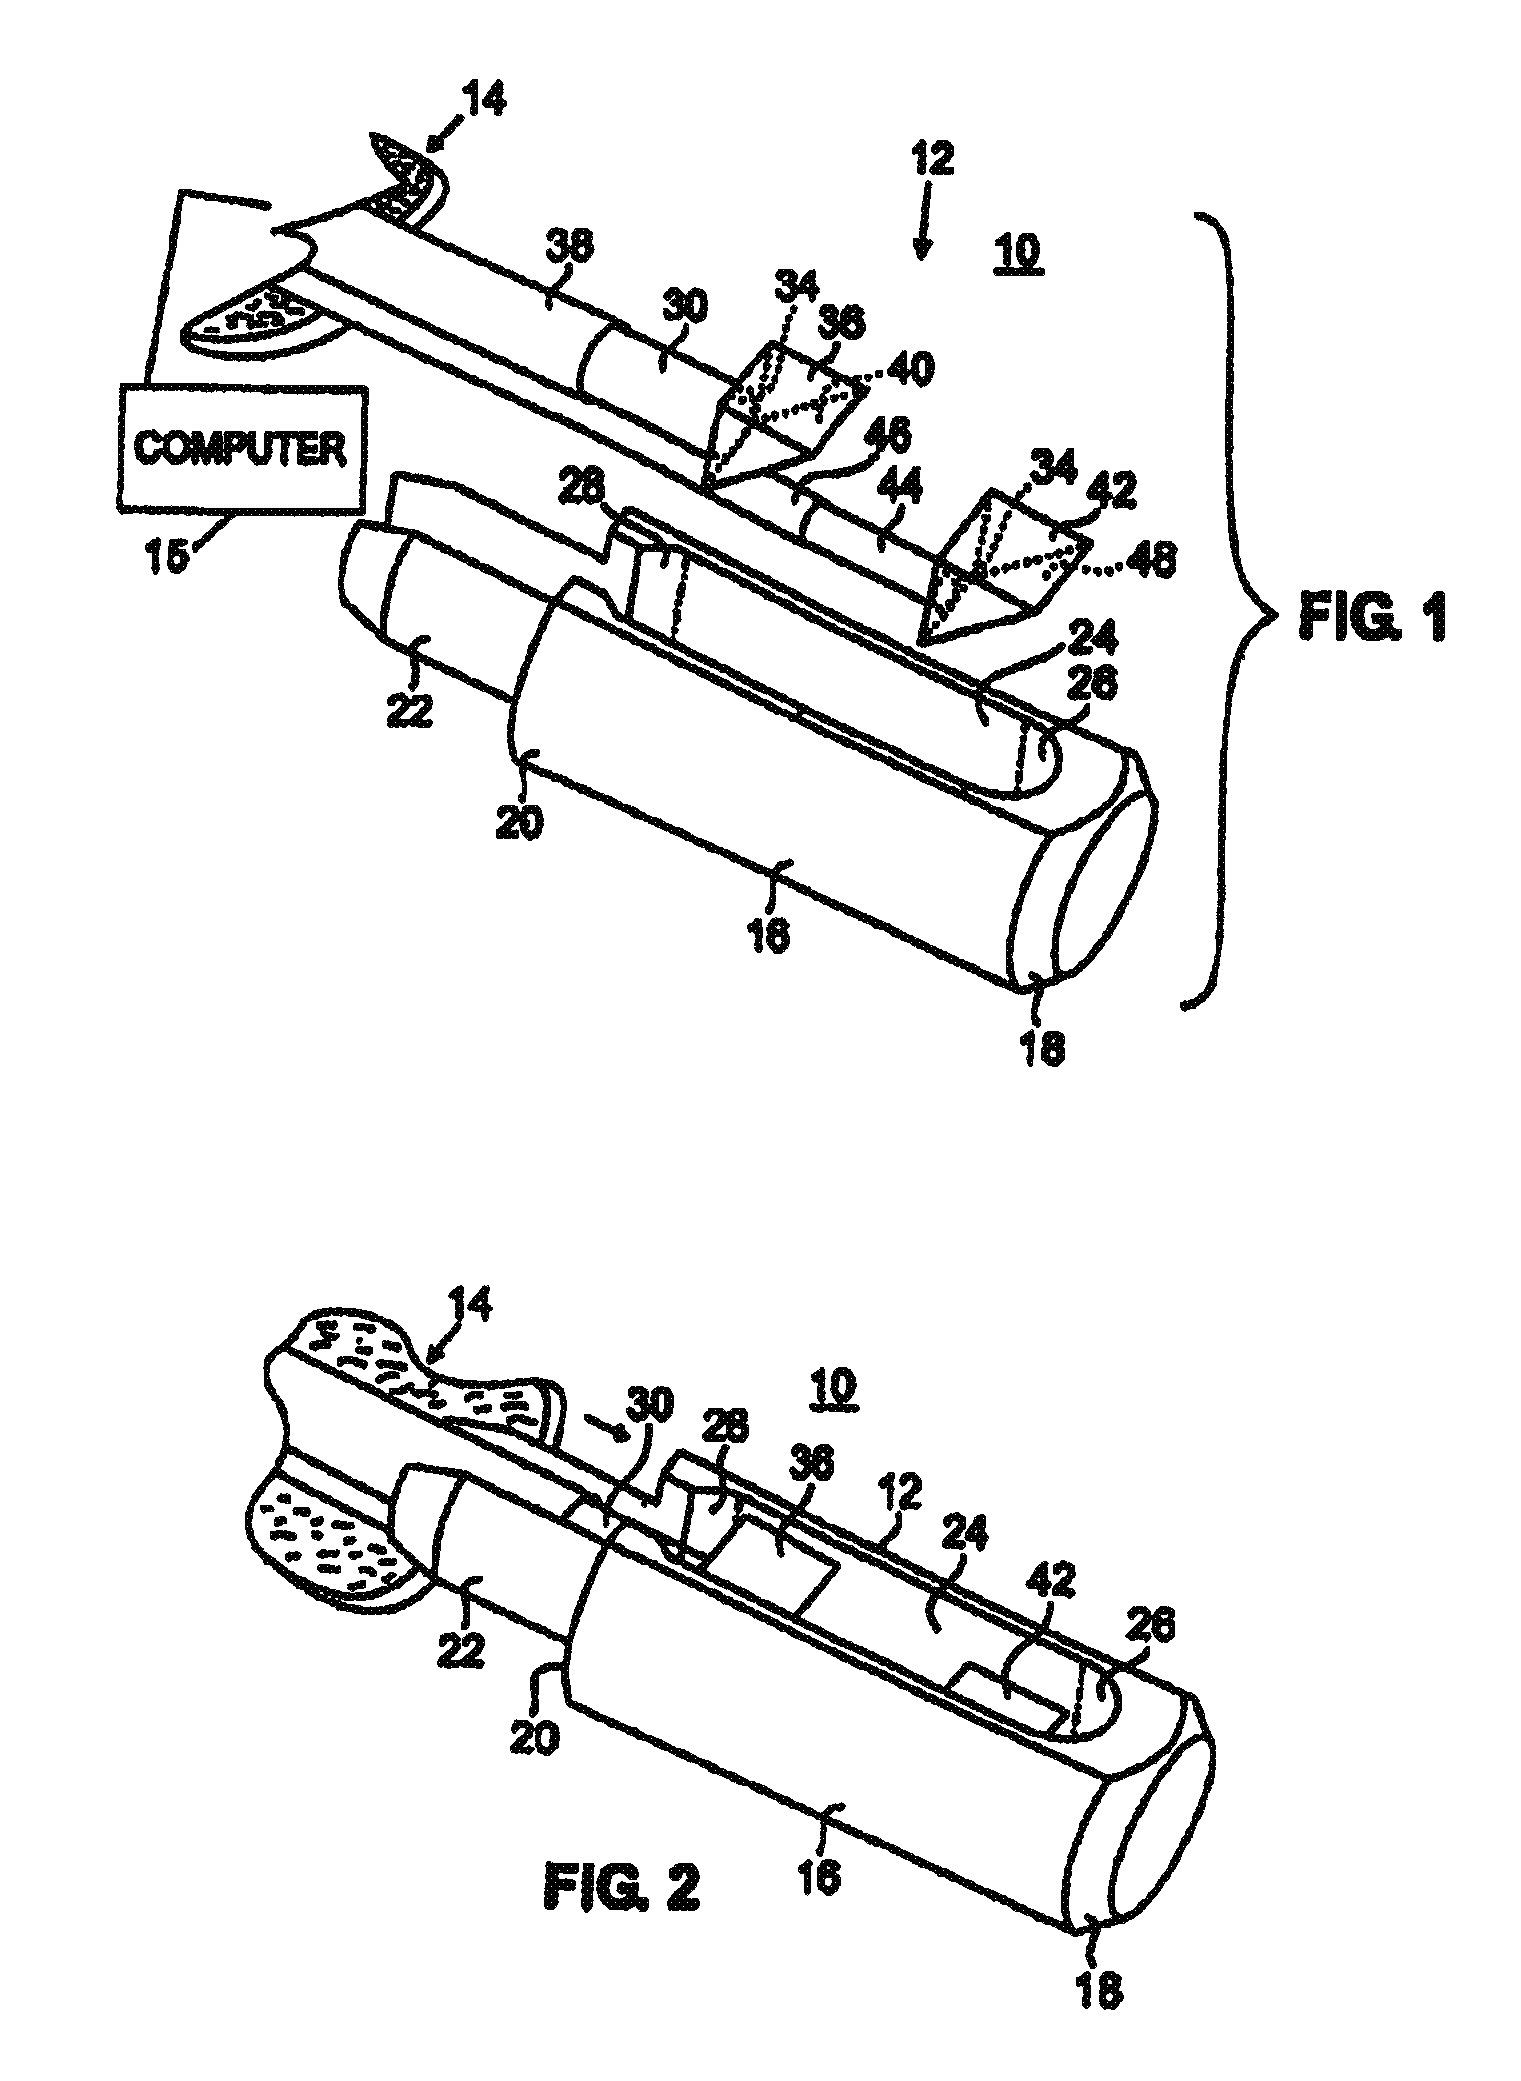 Catheter probe arrangement for tissue analysis by radiant energy delivery and radiant energy collection